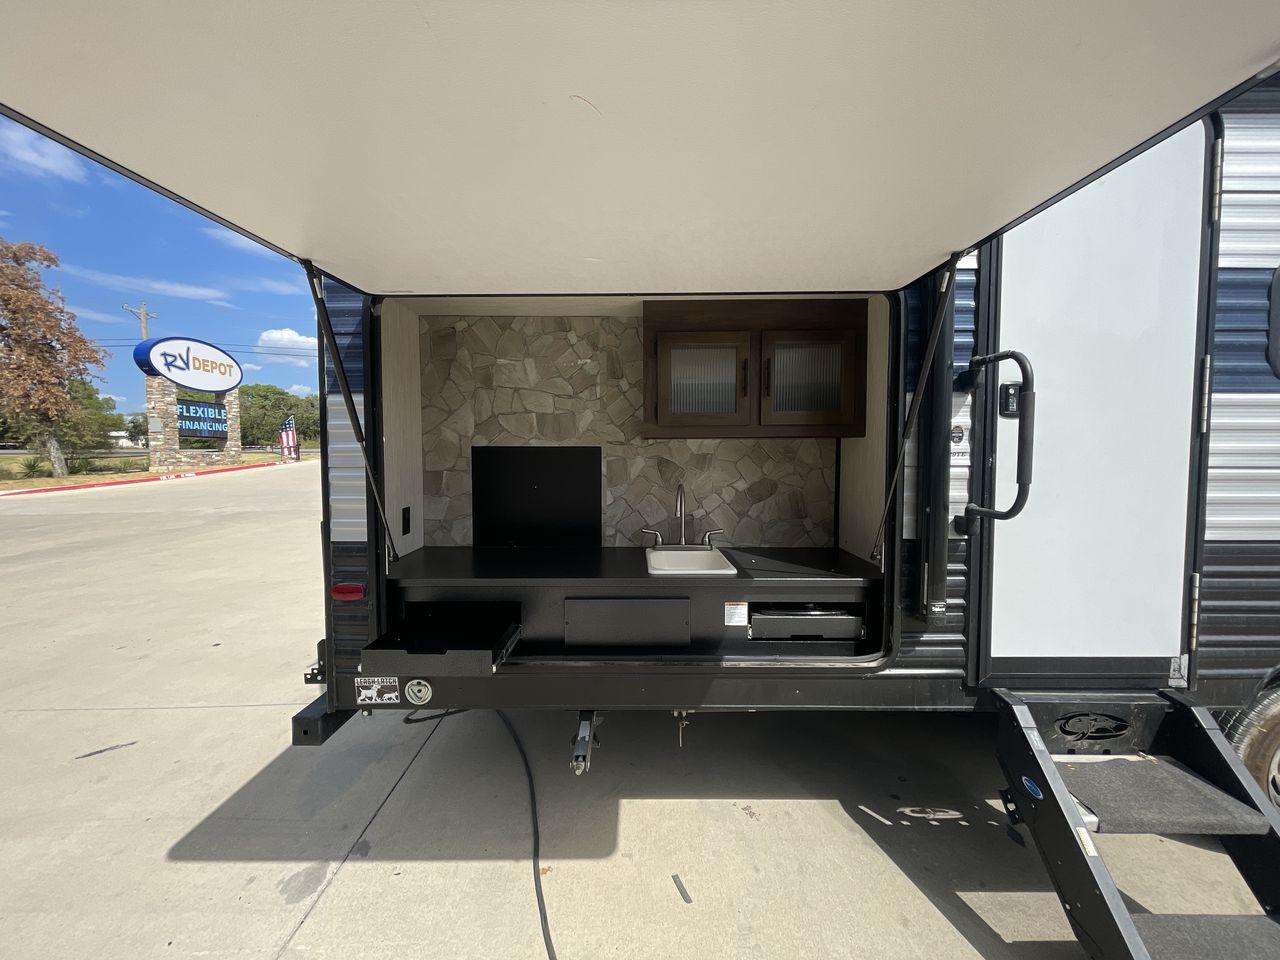 2020 FOREST RIVER CHEROKEE GRAY WOLF (4X4TCKE21LX) , Length: 36.5 ft. | Dry Weight: 6,428 lbs. | Slides: 1 transmission, located at 4319 N Main St, Cleburne, TX, 76033, (817) 678-5133, 32.385960, -97.391212 - Discover extra features that contribute to making this RV an ideal investment. (1) The Grey Wolf is Lightweight Champion, as it is made with lightweight materials, so it can be towed by most SUVs and trucks. (2) It has plenty of room for everyone to spread out and relax. (3) It has an exterior - Photo #19